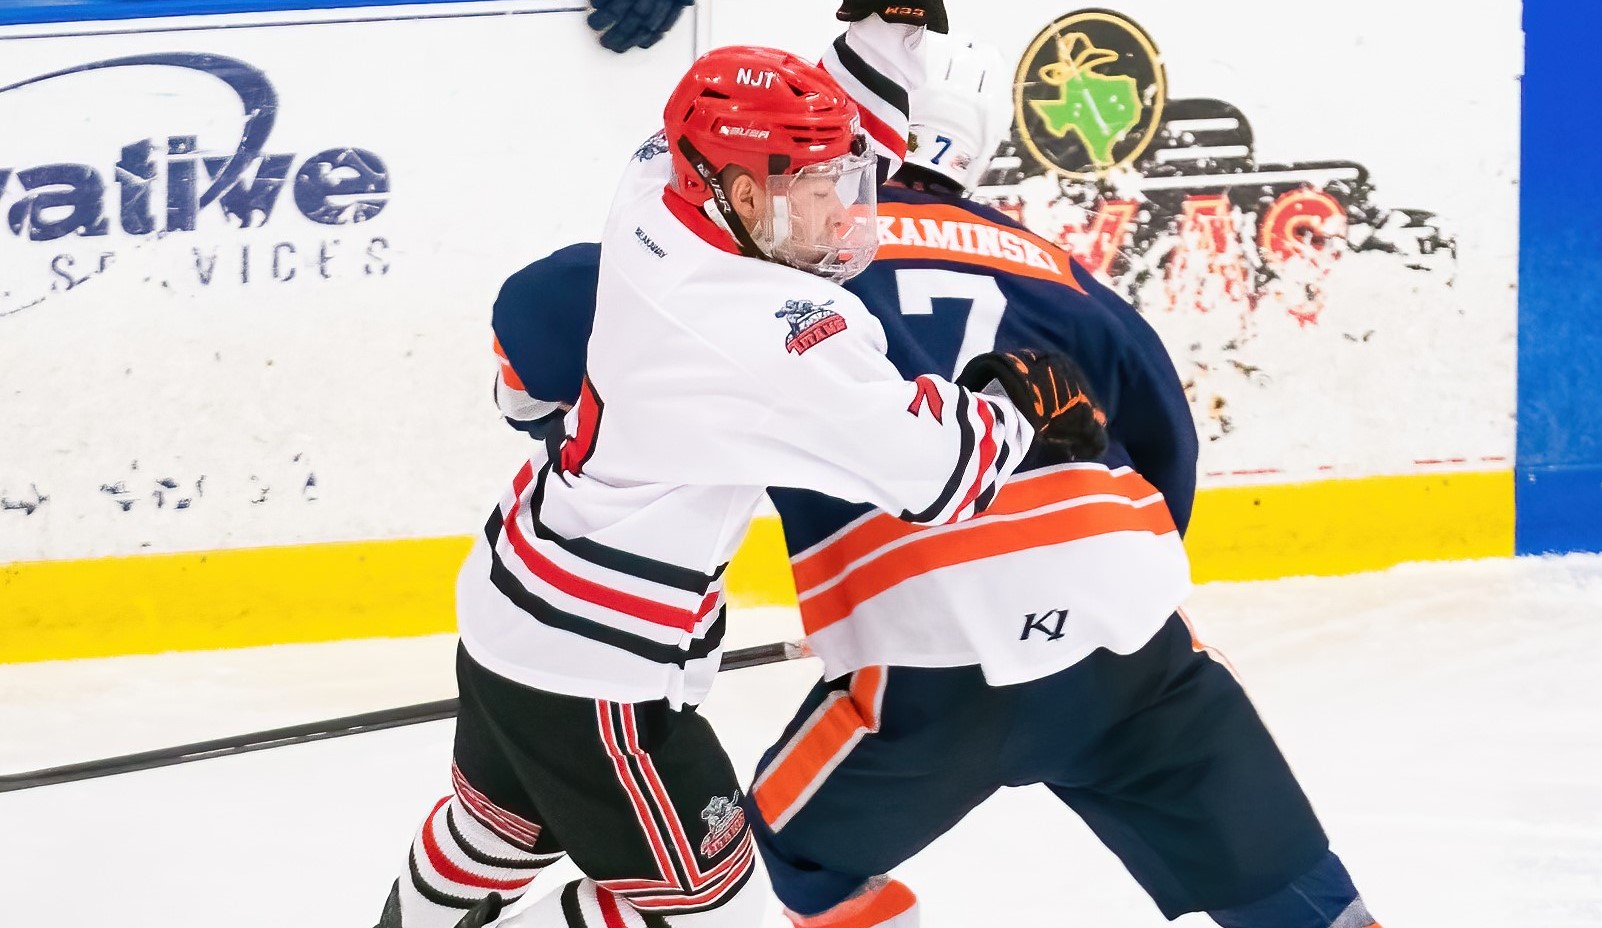 Generals rout Titans 10 – 2 to force deciding game in East Division Finals